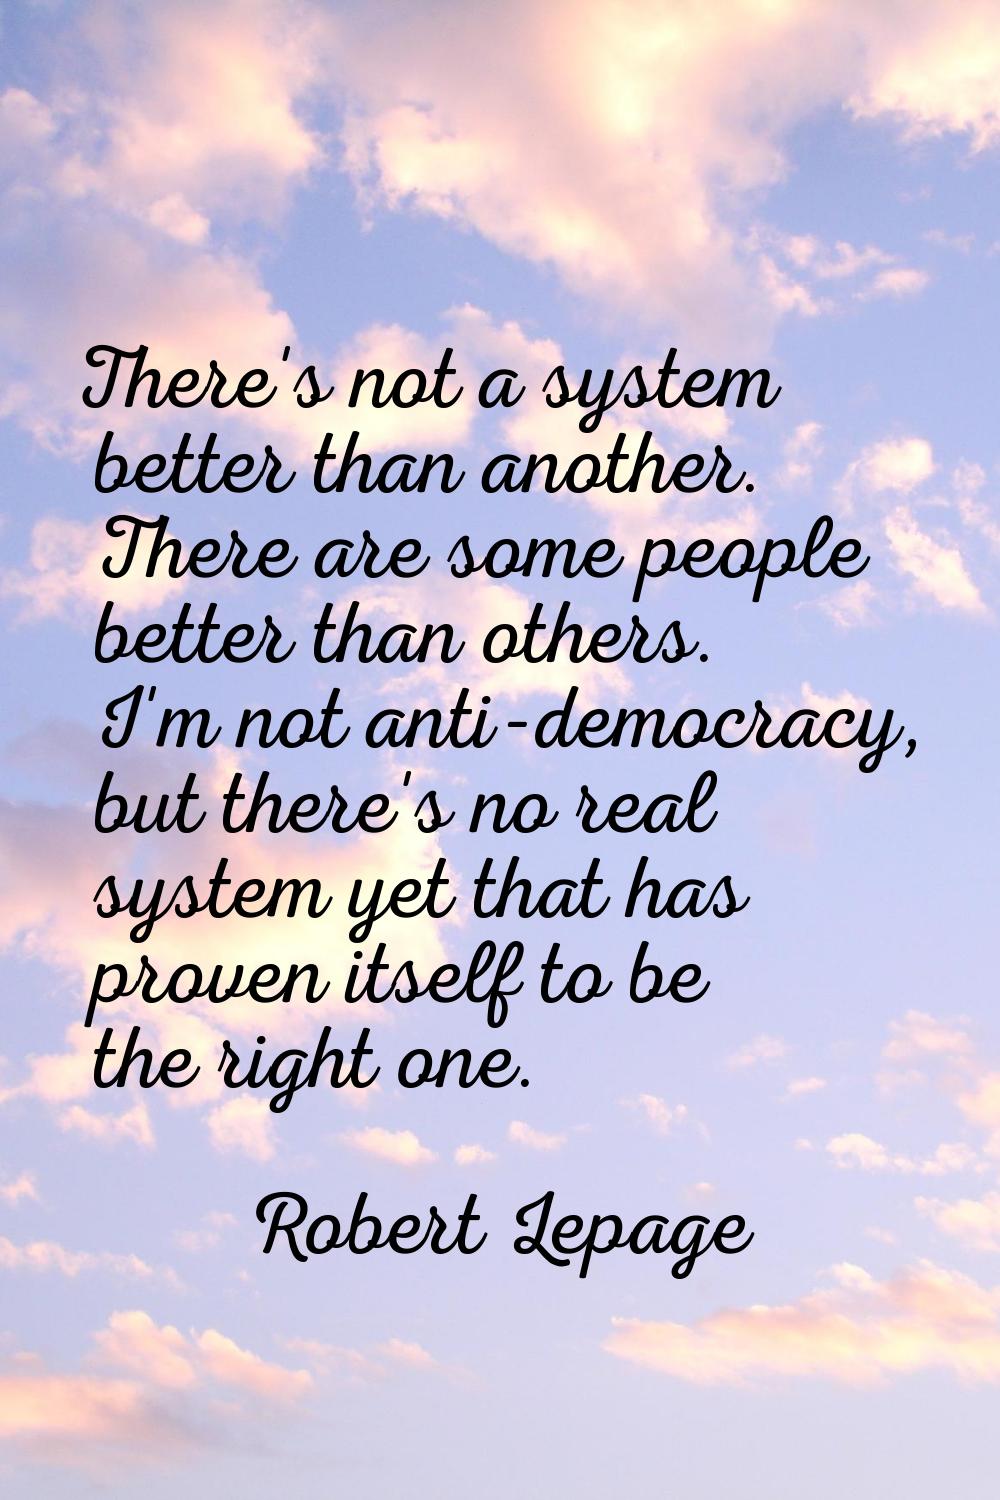 There's not a system better than another. There are some people better than others. I'm not anti-de